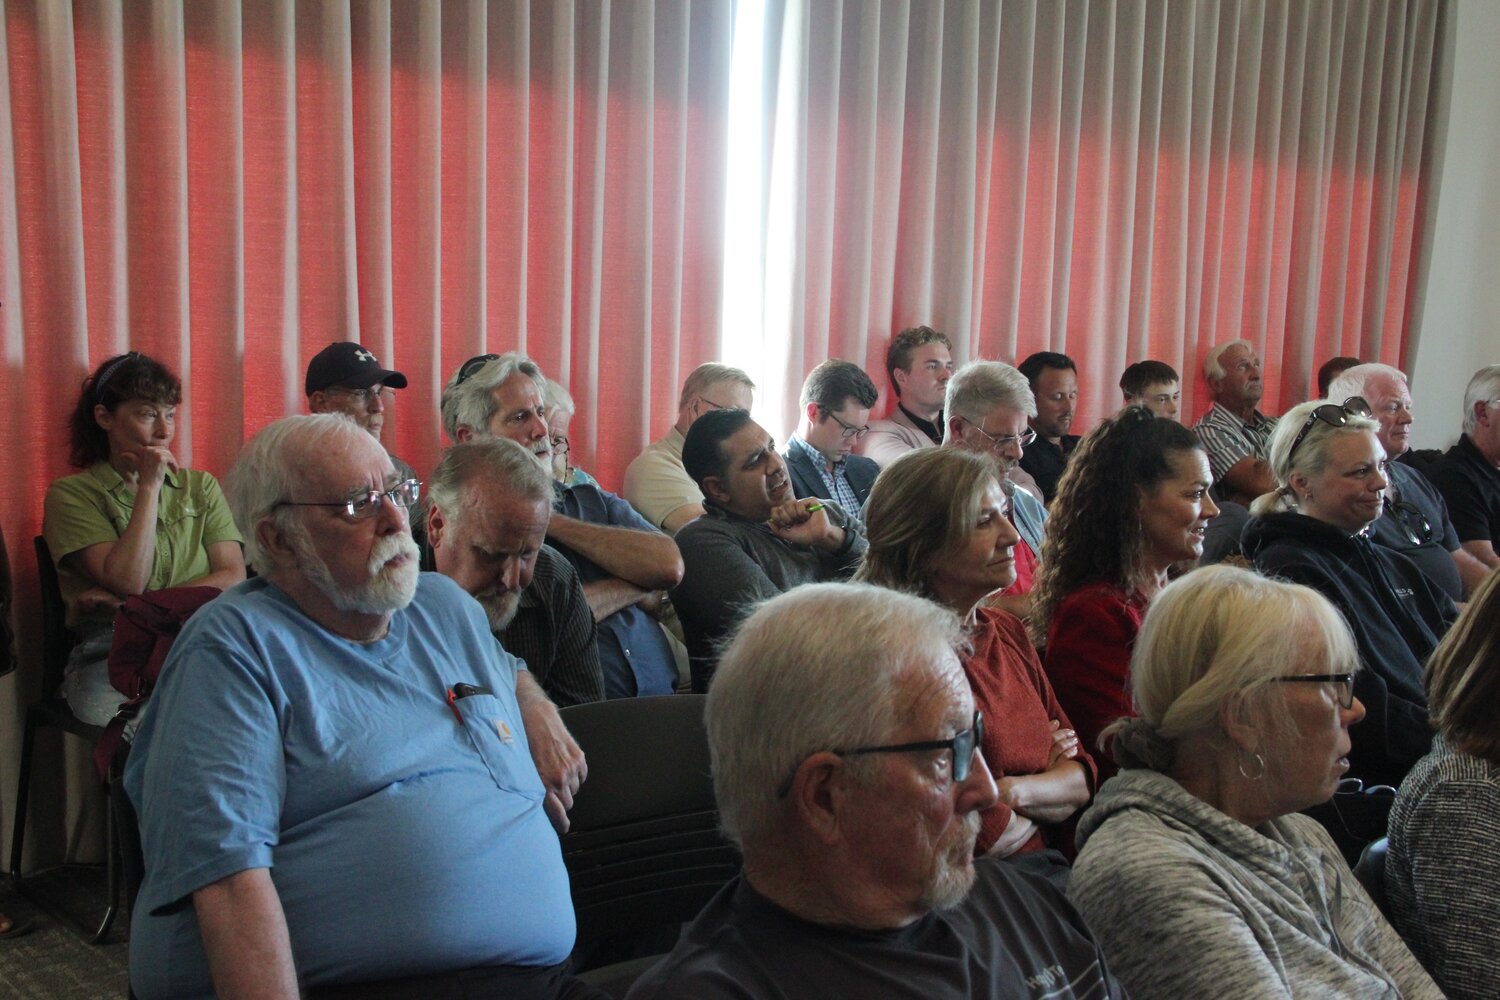 Dozens of people packed into Blaine City Council chambers on July 10 for a public hearing on council’s decision to enact an emergency moratorium on manufactured home park building permit applications.